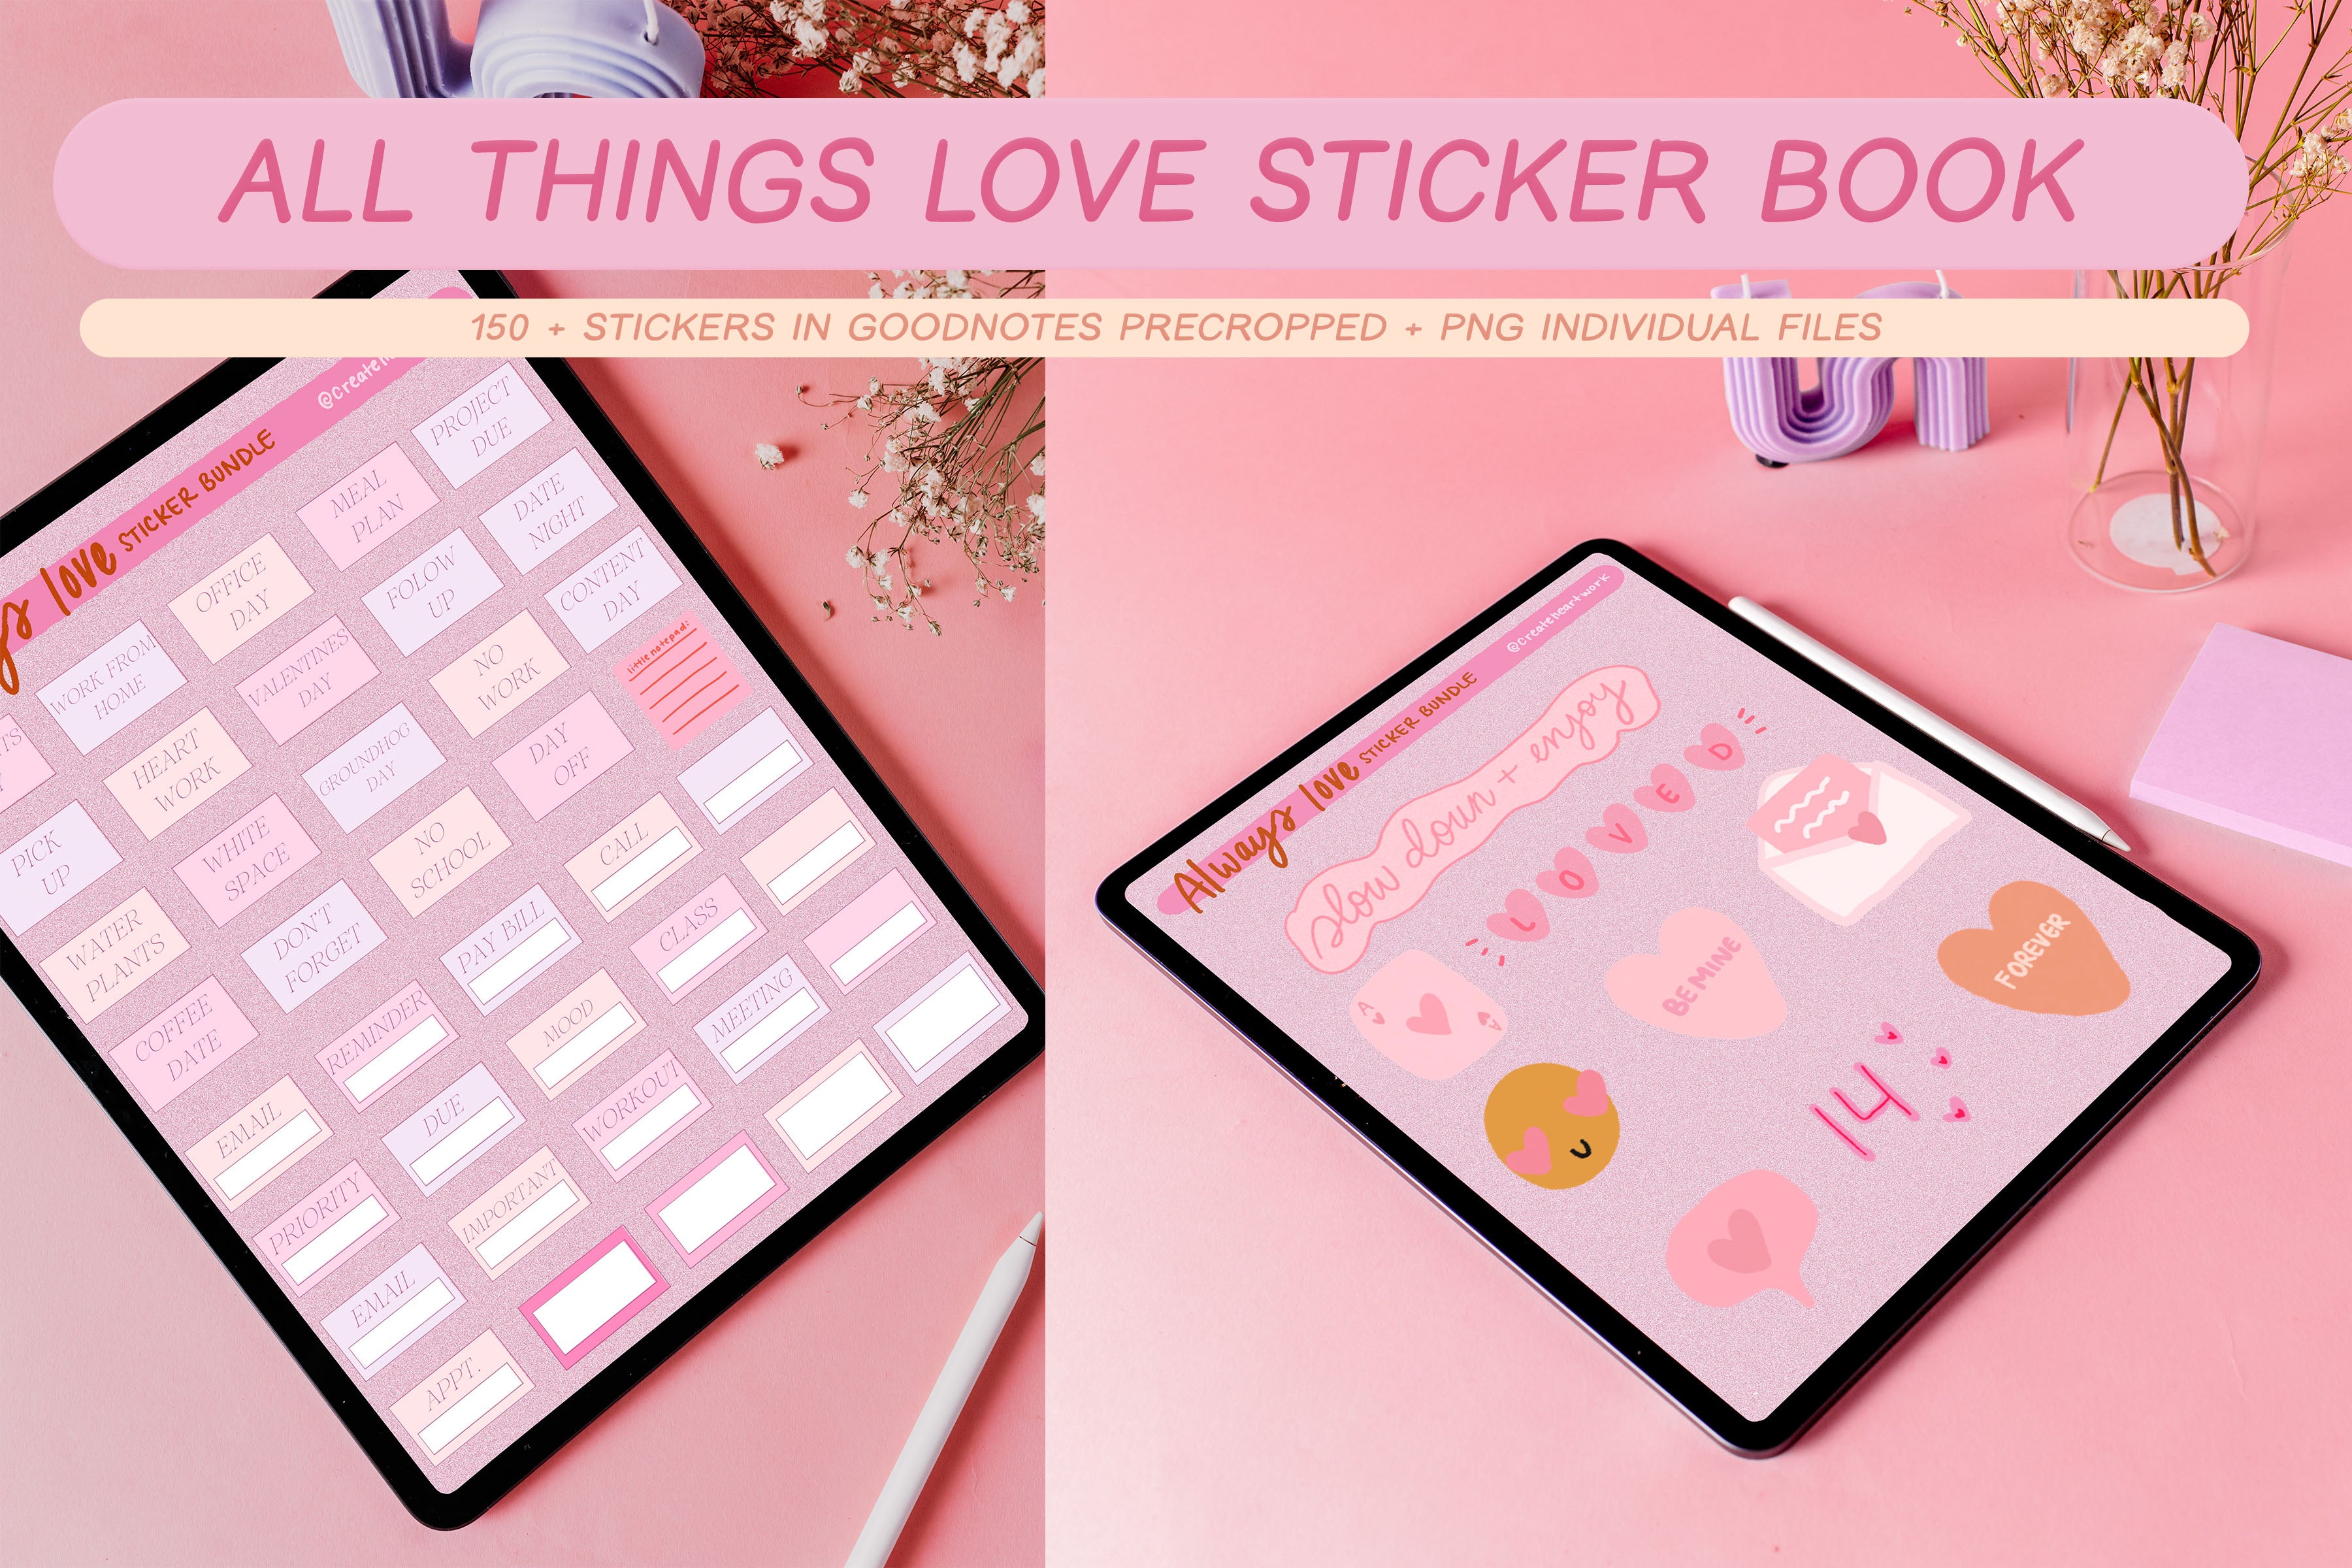 All Things Love Sticker Book